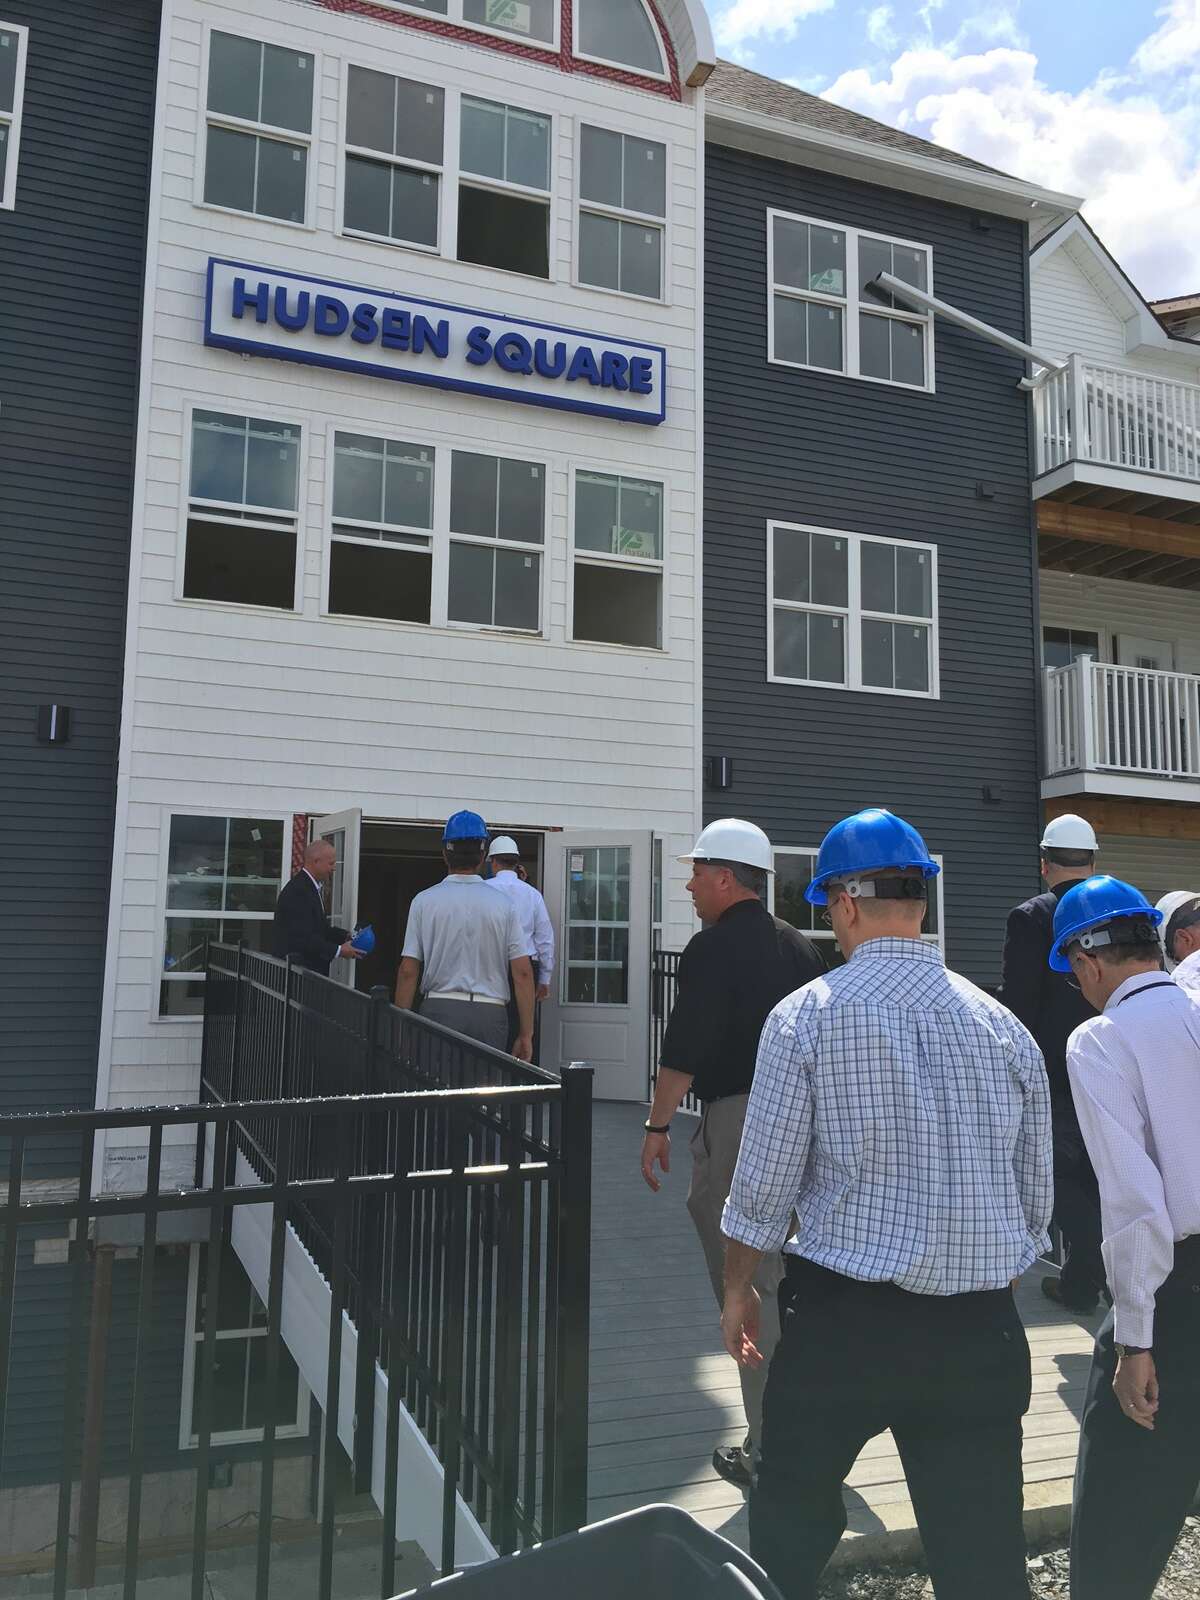 Officials get a look at construction progress at the $25 million Hudson Square apartment complex on Van Schaick Island in Cohoes Tuesday morning. (Eric Anderson/Times Union)